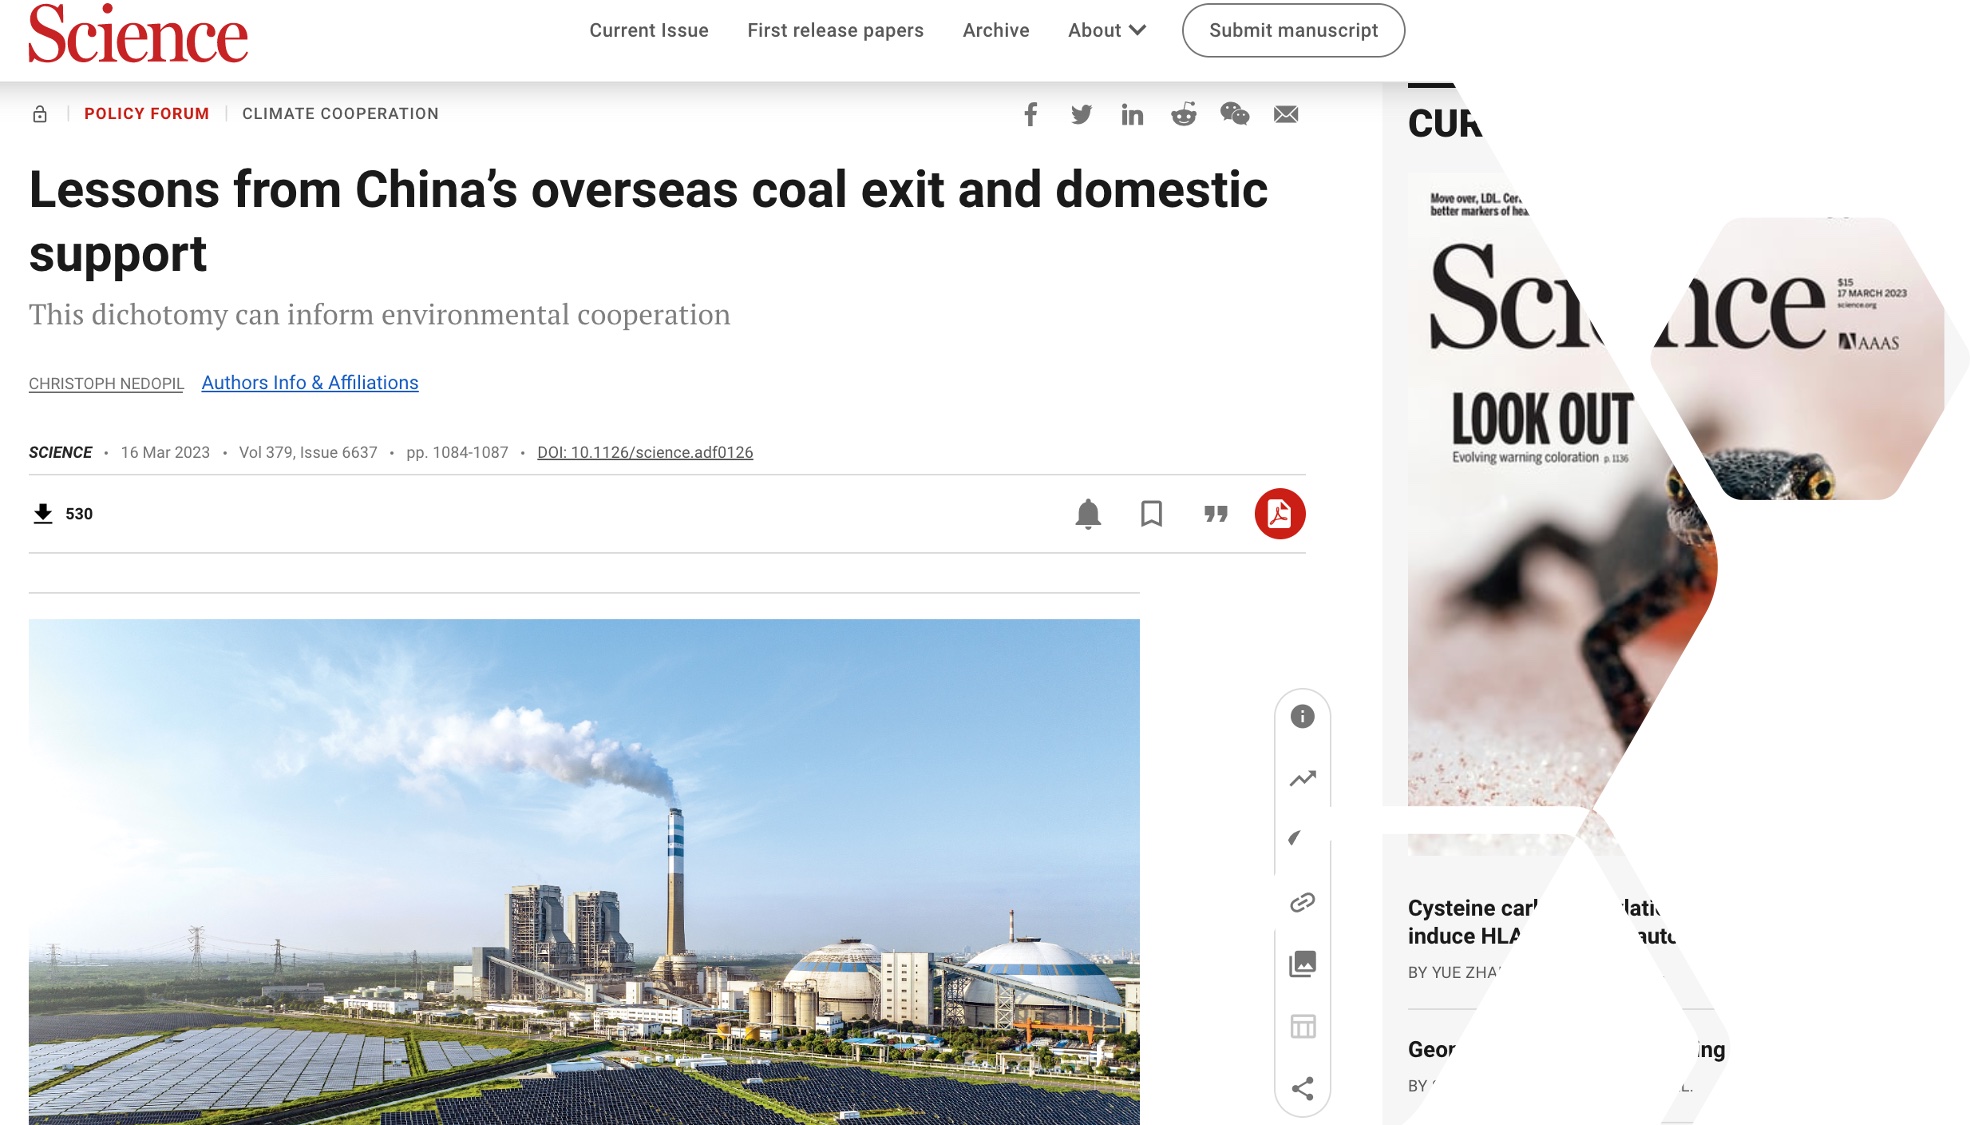 Science Nedopil (2023)_Lessons from China's Overseas coal exit and domestic support